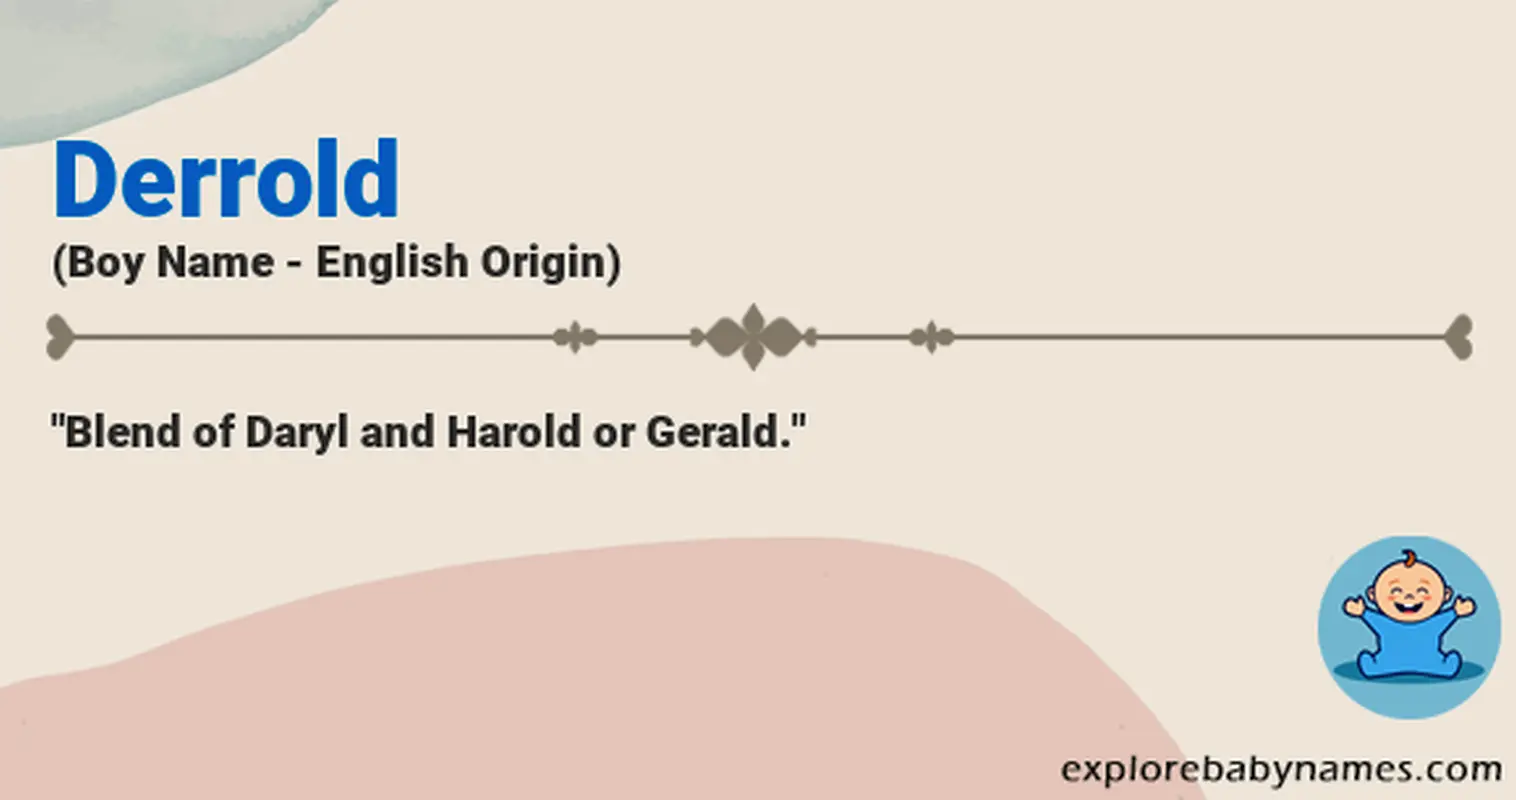 Meaning of Derrold